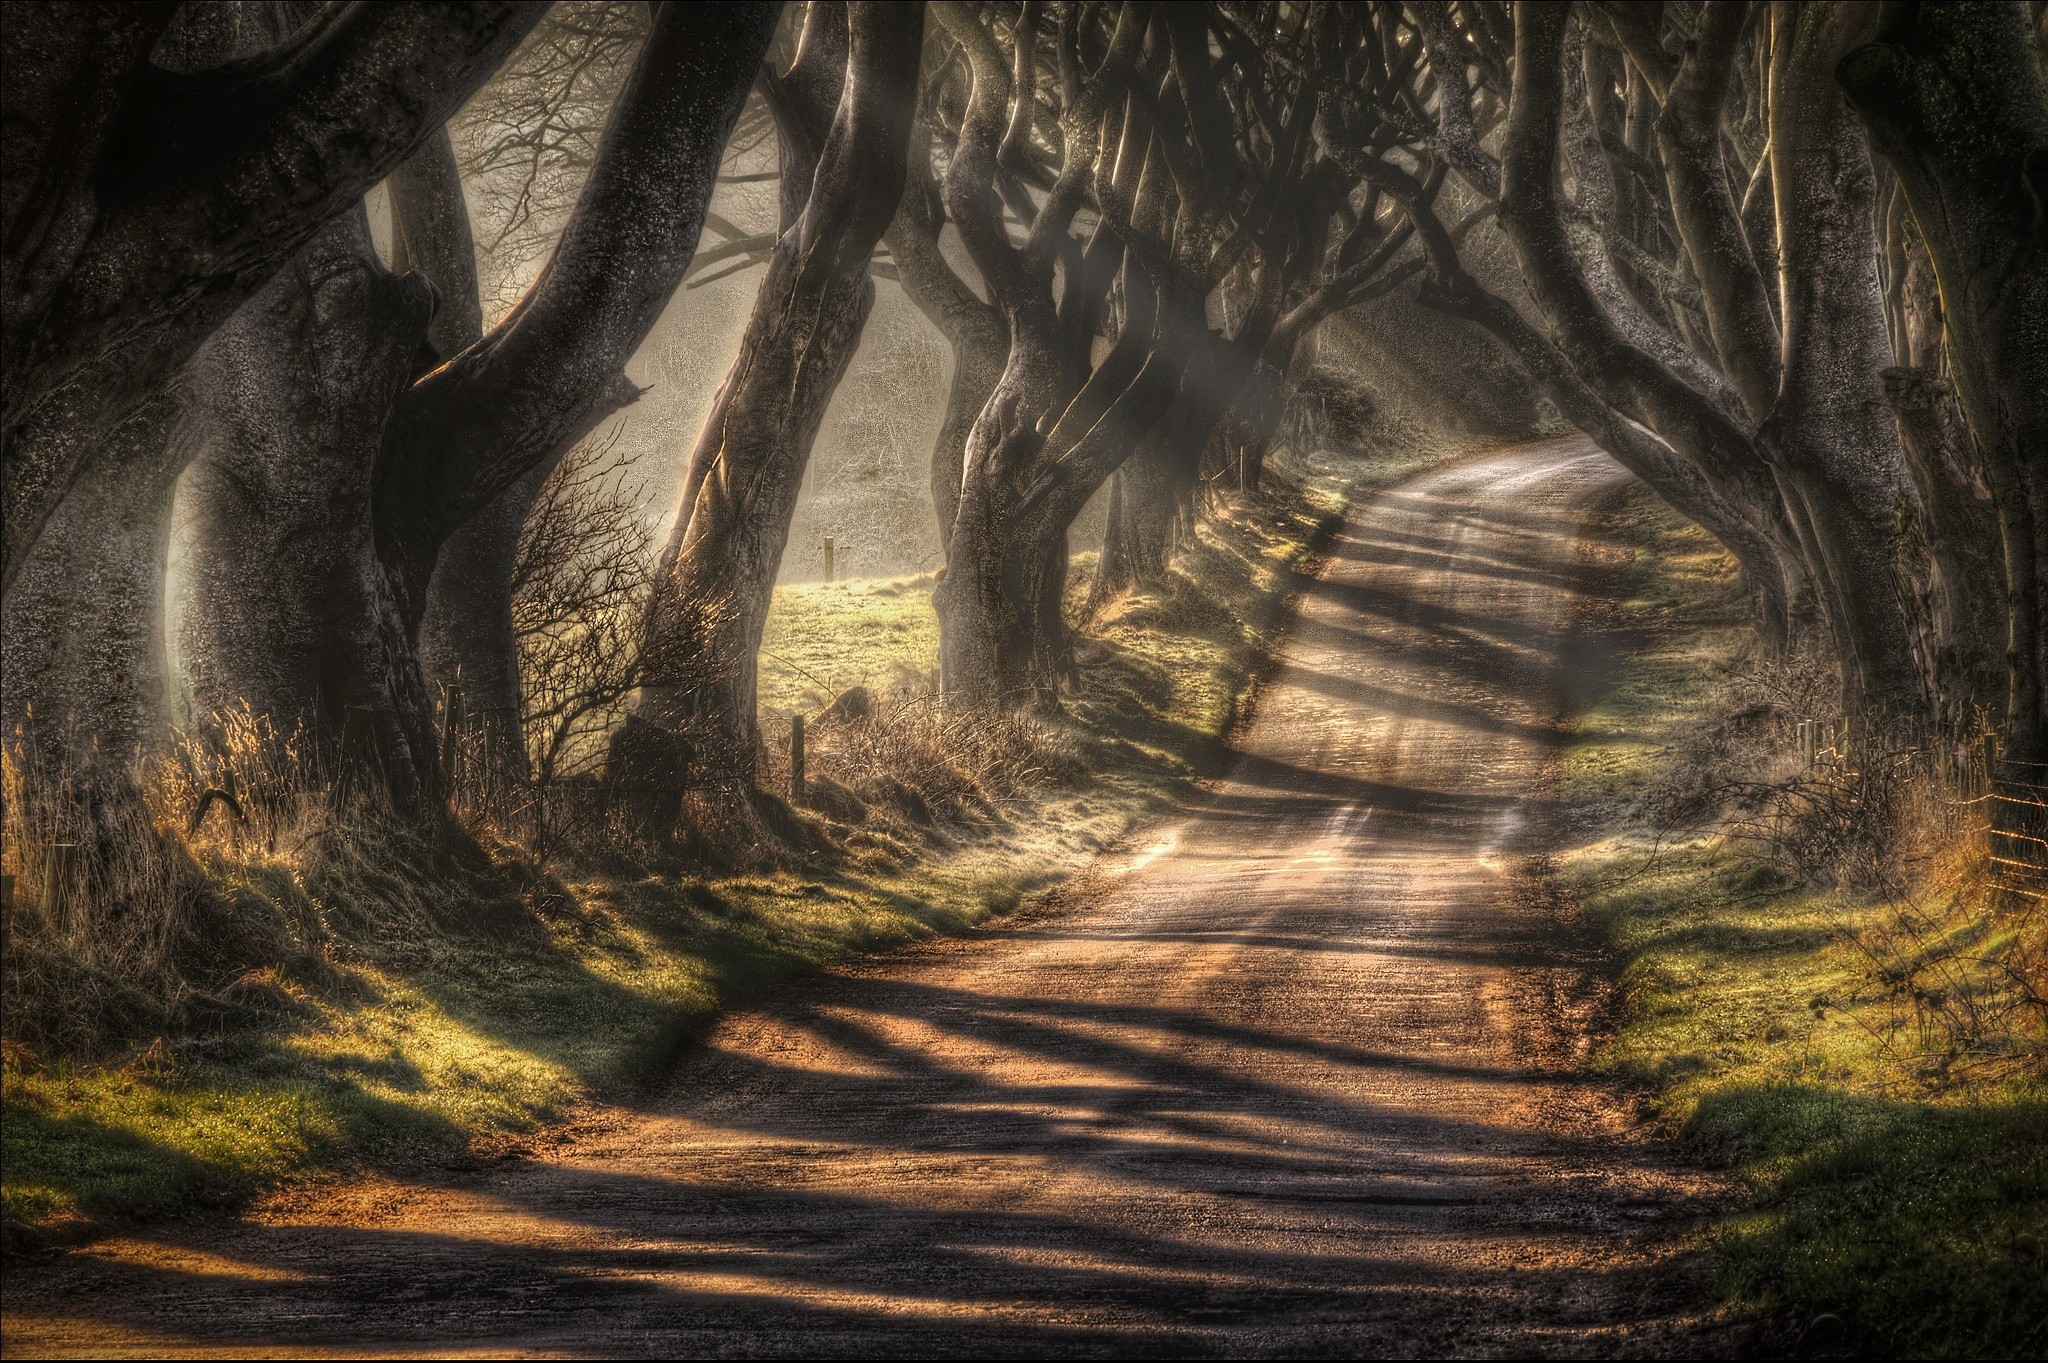 General 2048x1363 landscape sunlight road nature trees HDR fence sun rays dirt road